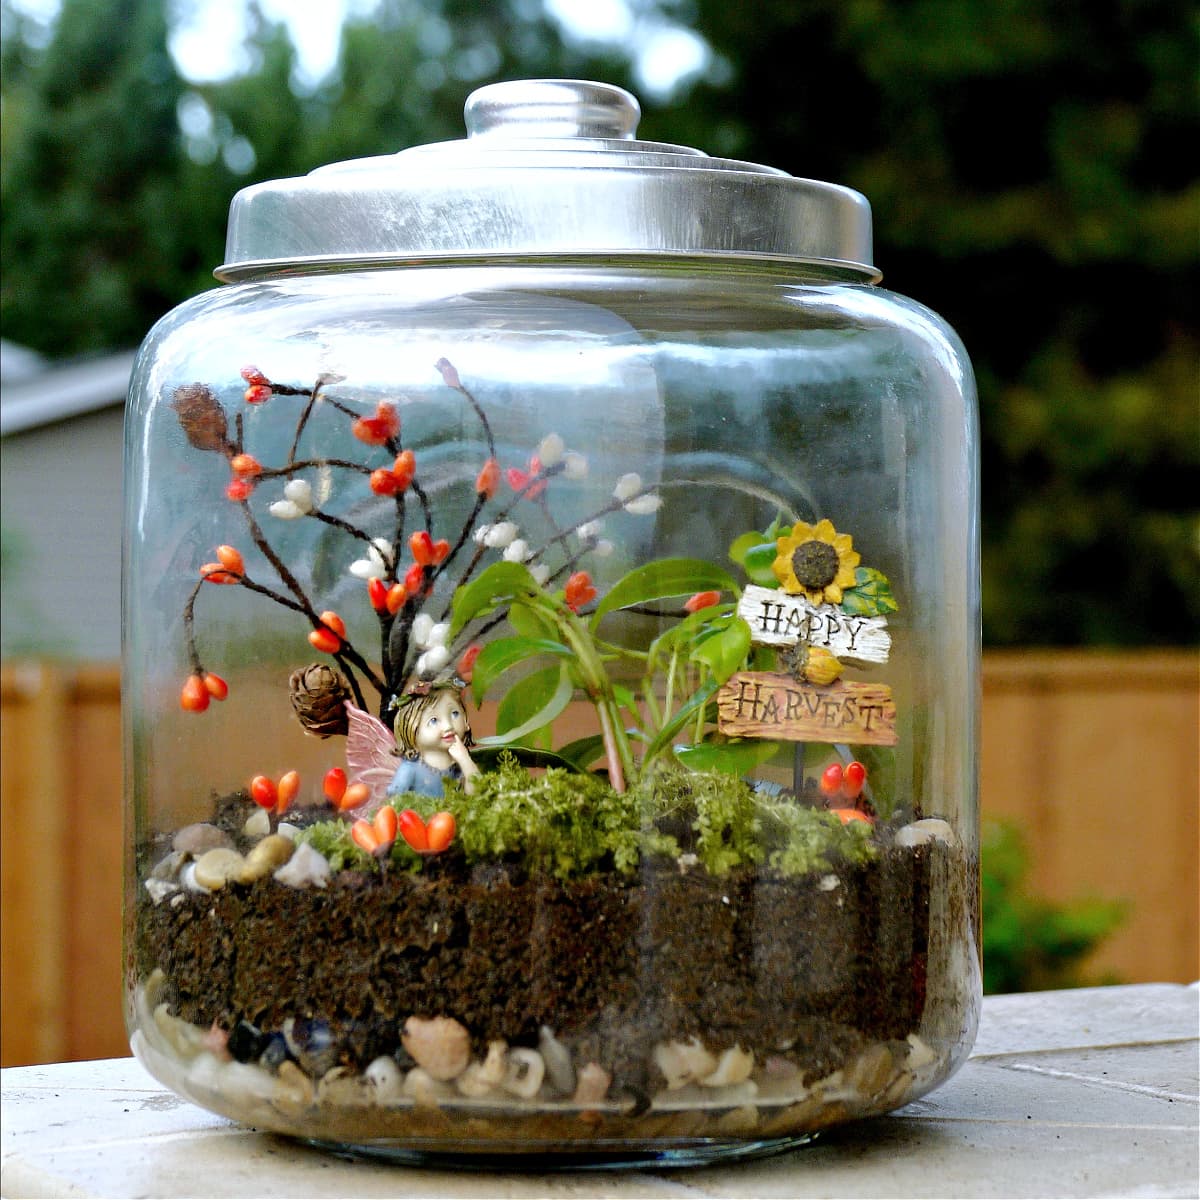 Large glass jar filled with plants, soil, and small fairy figurine.